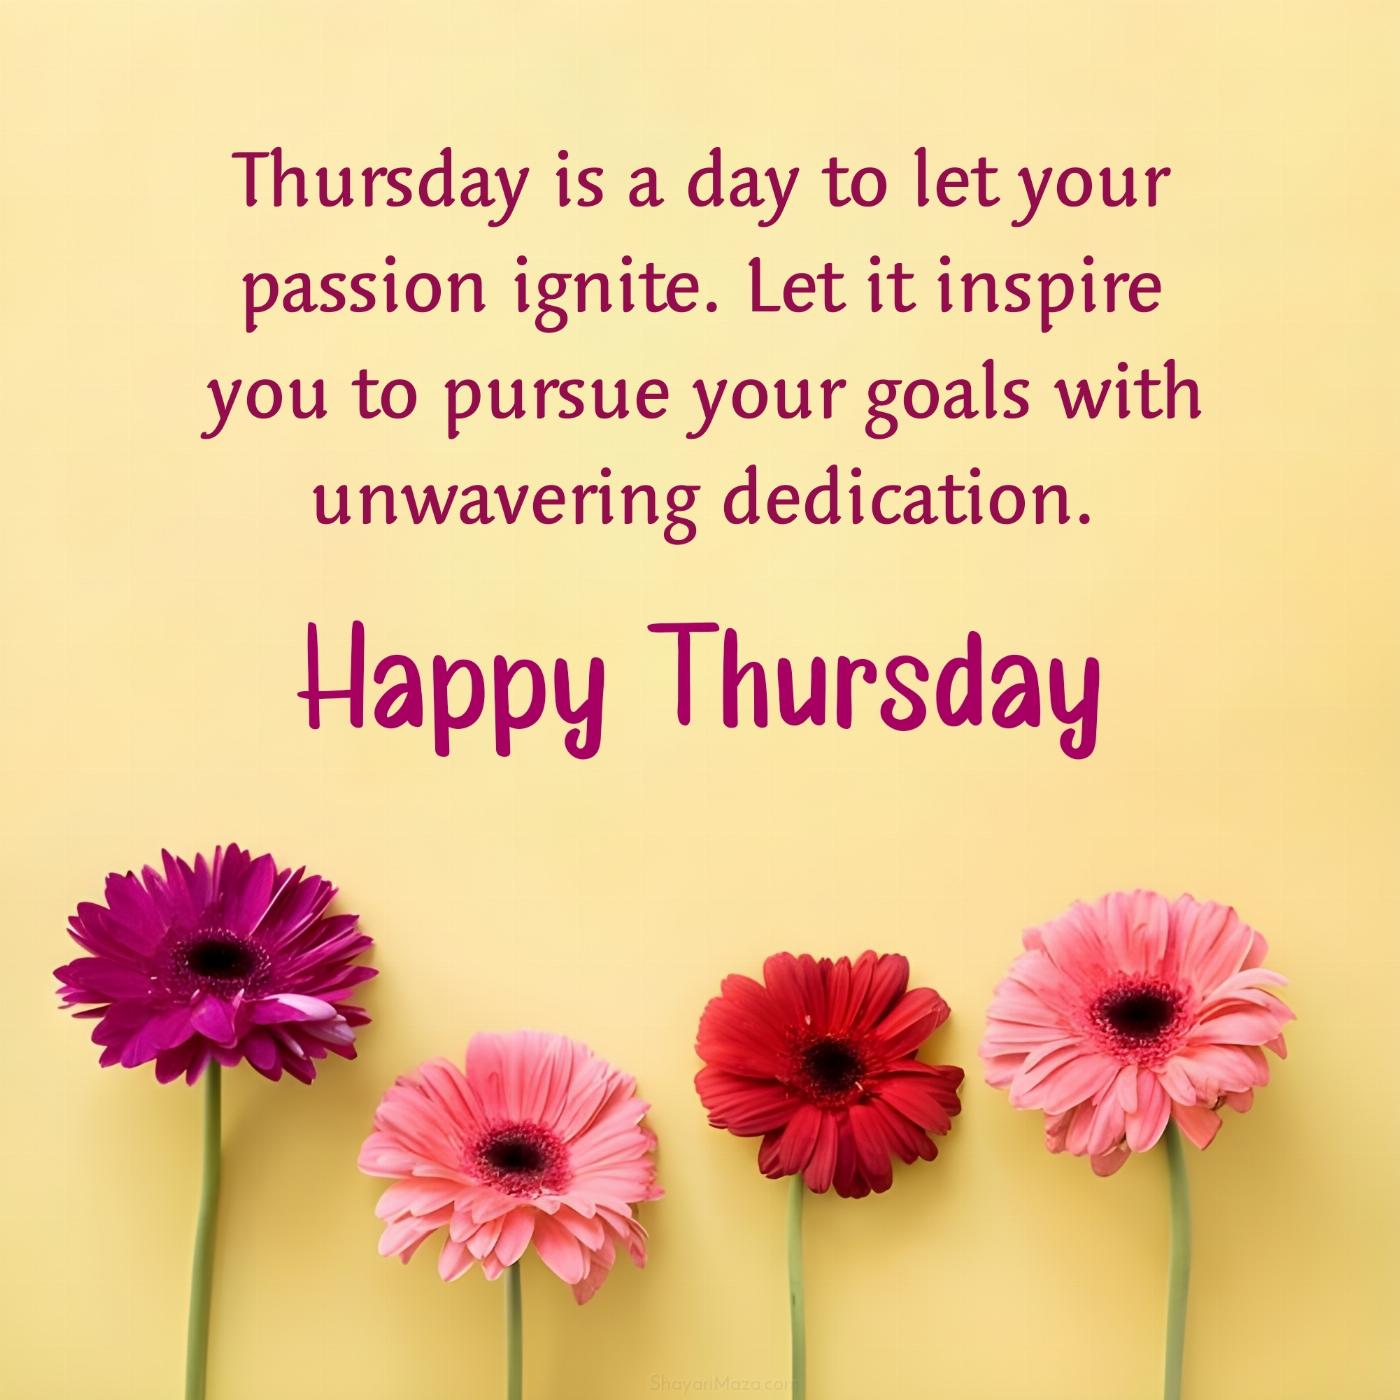 Thursday is a day to let your passion ignite